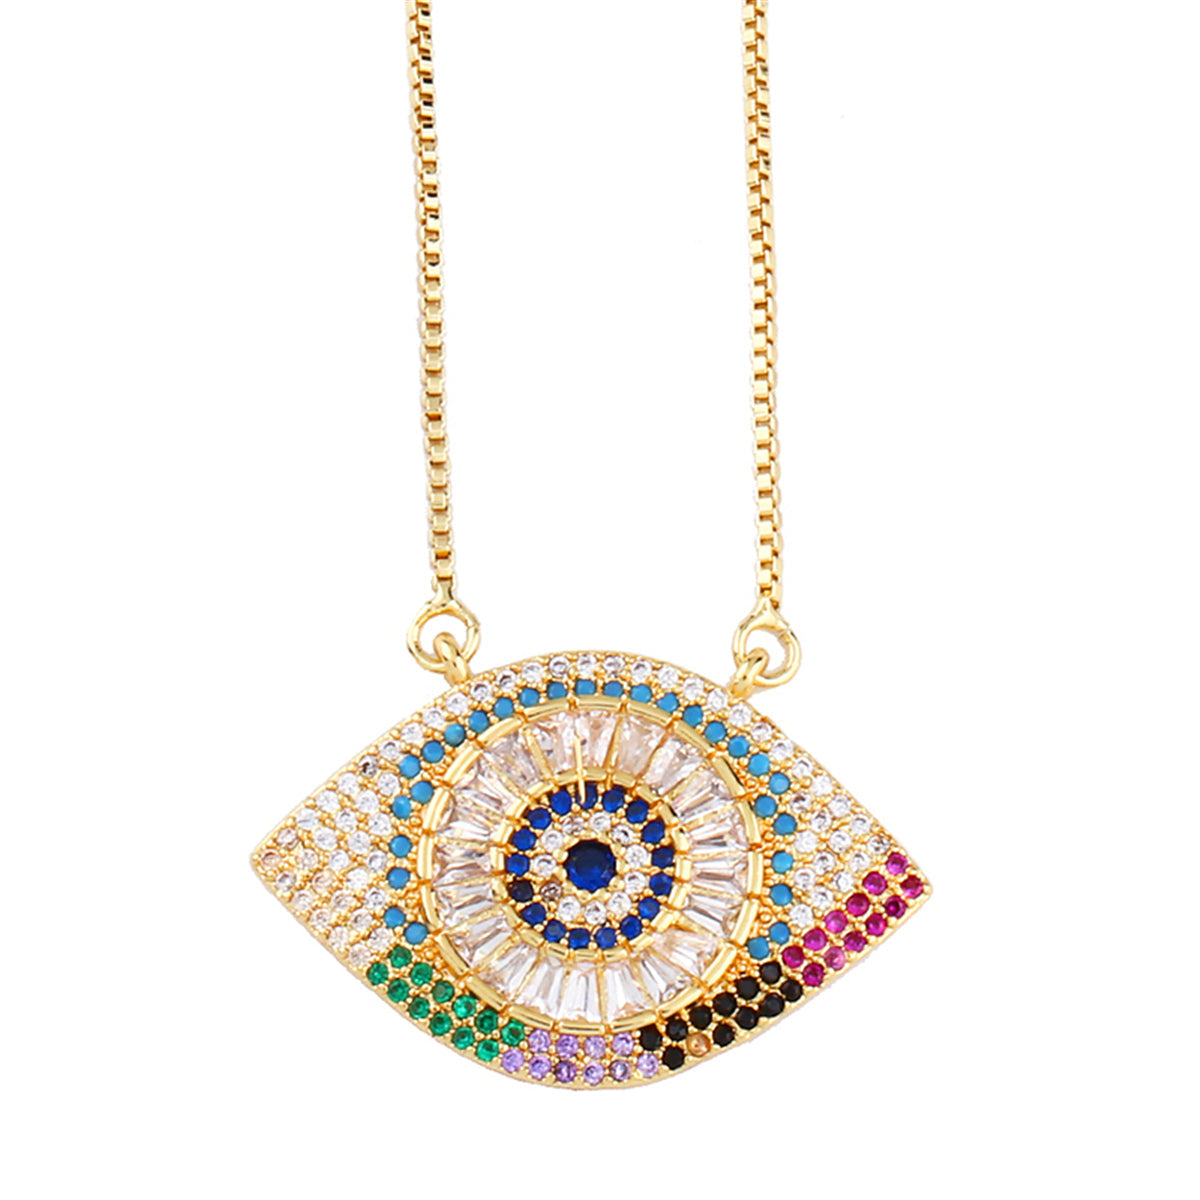 Rainbow Cubic Zirconia & Crystal 18K Gold-Plated Evil Eye Pendant Necklace